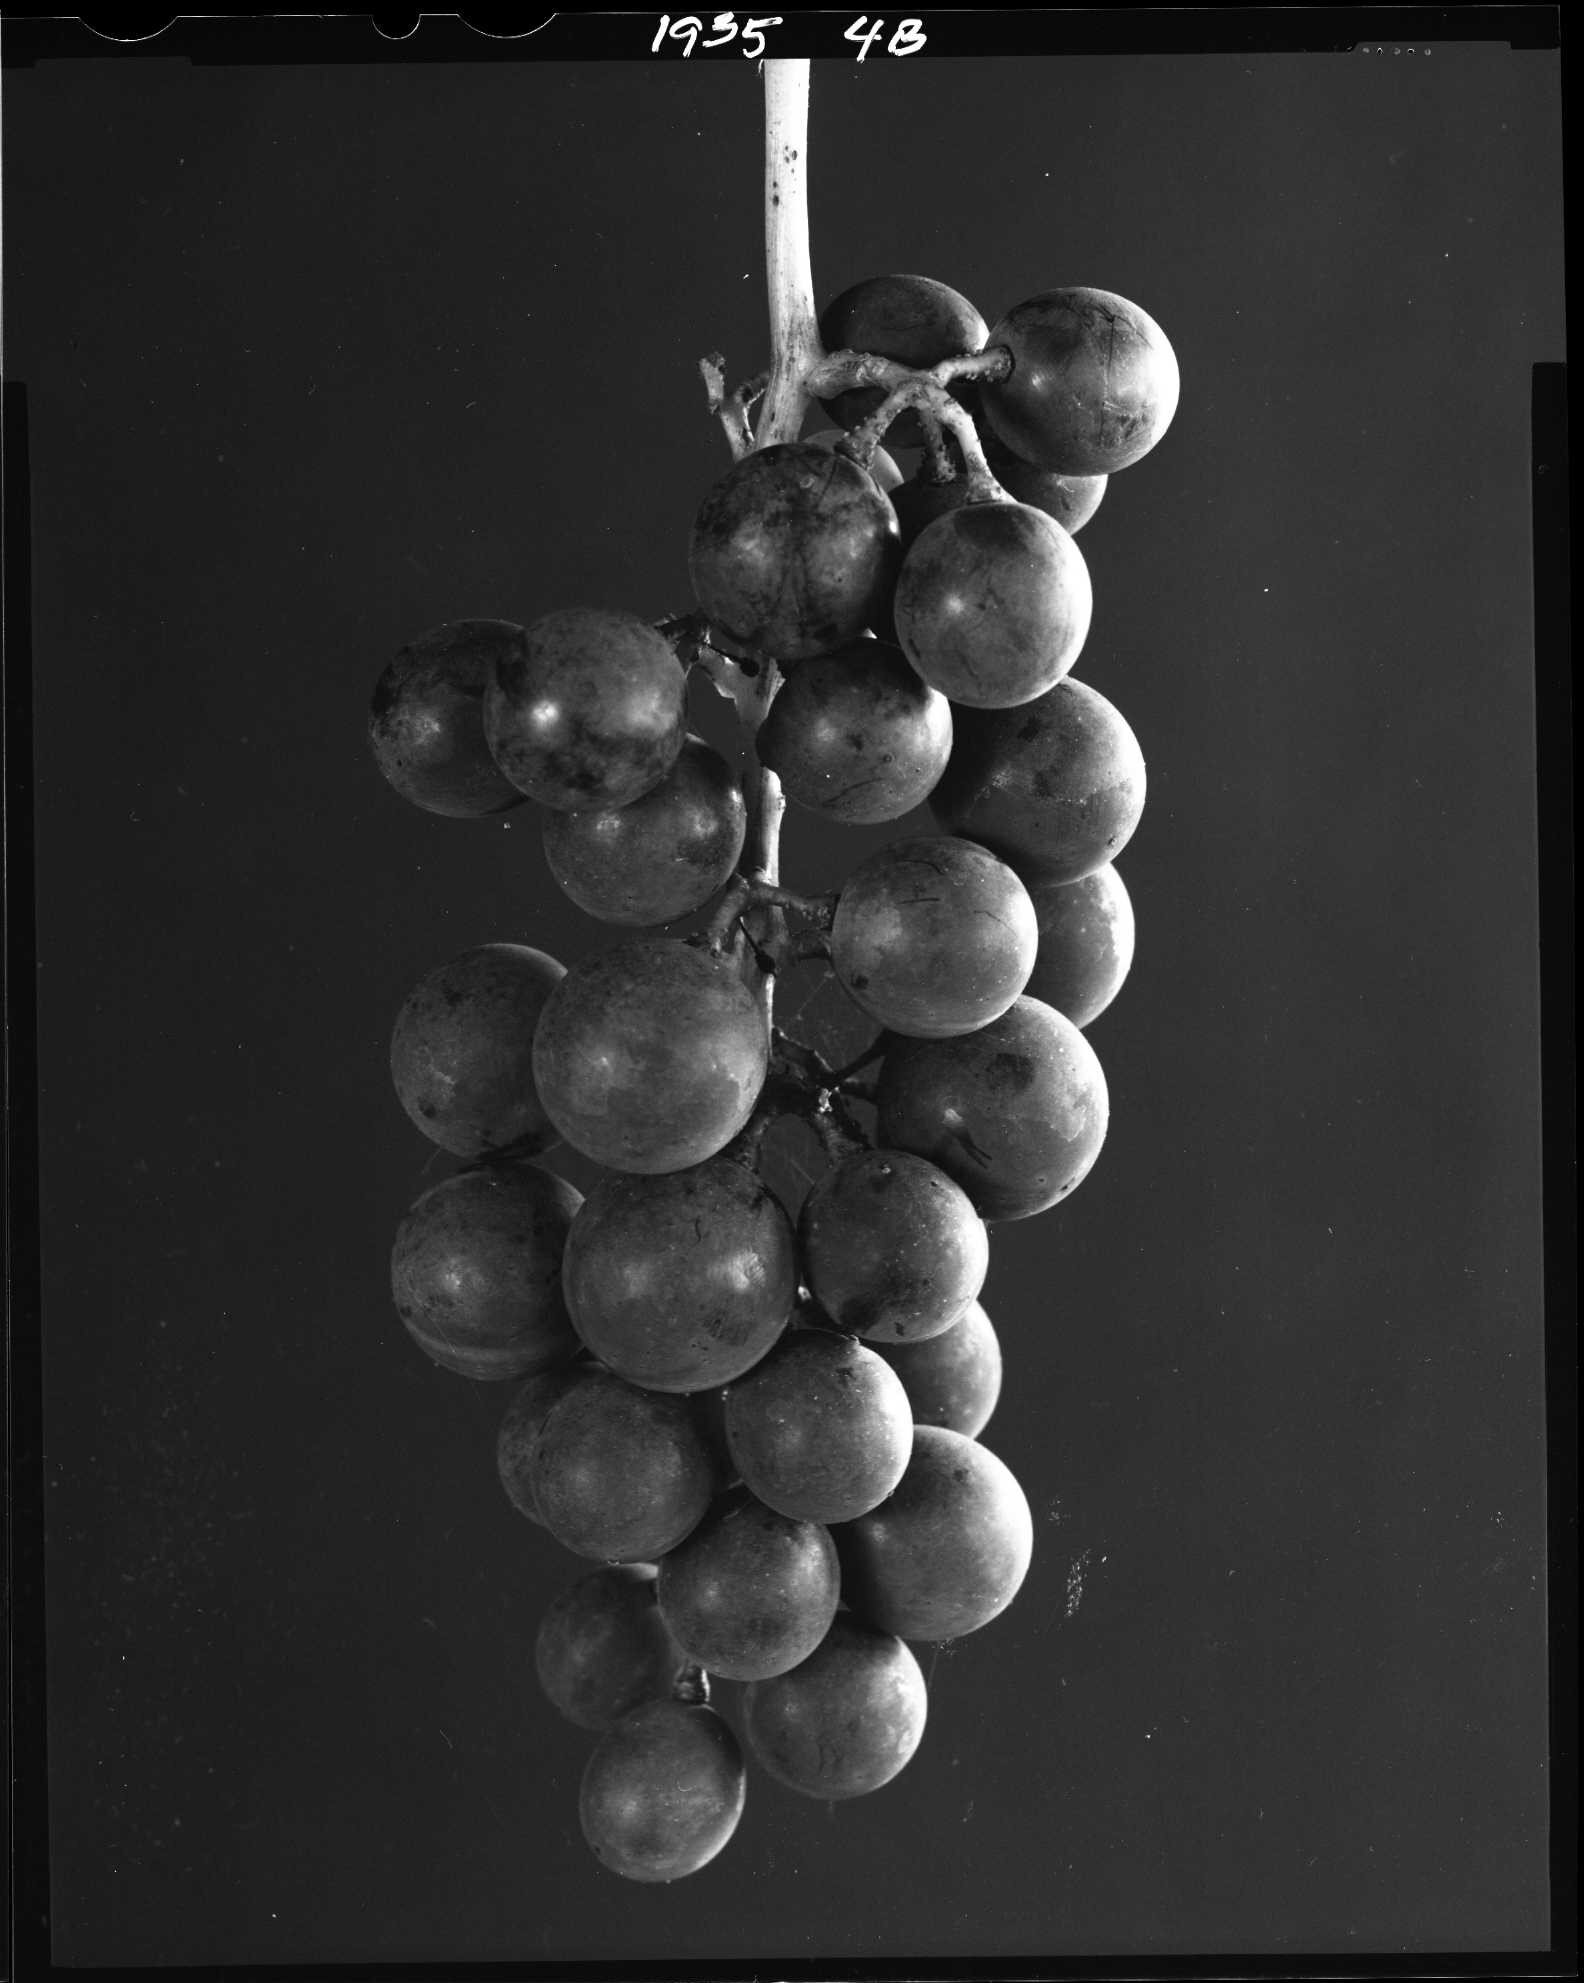  Concord grapes, from the Produce Series 